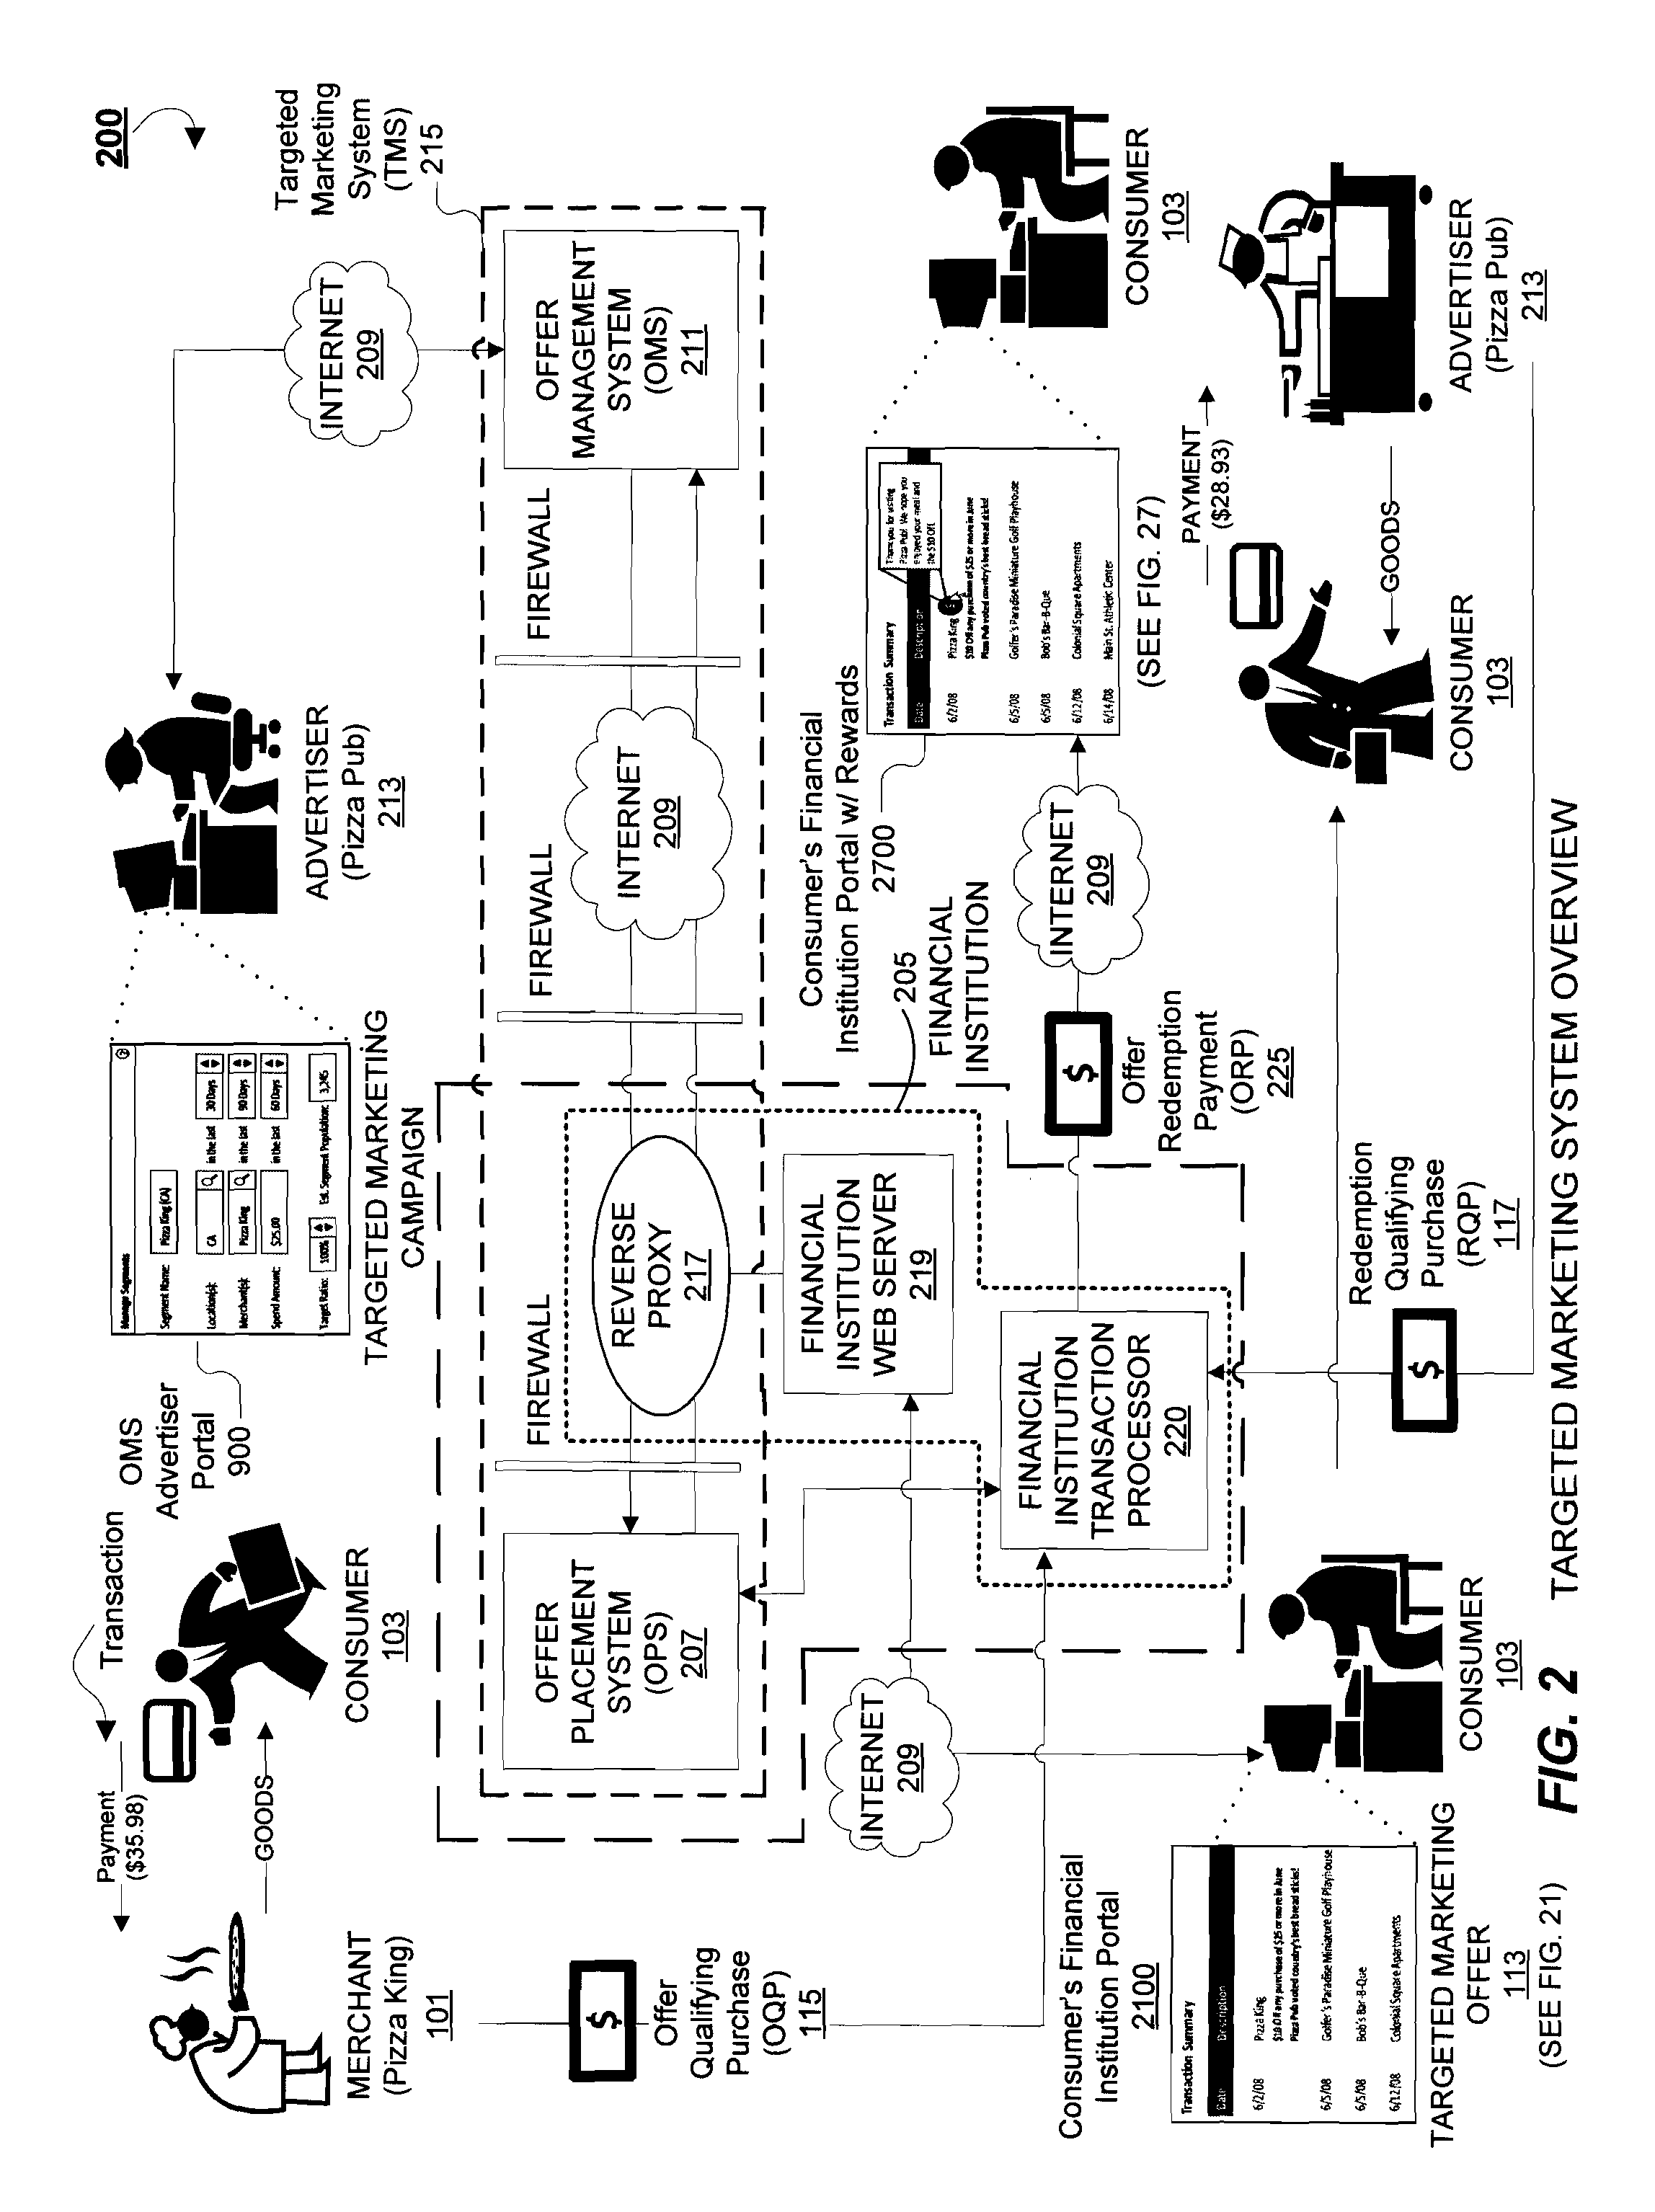 System and Methods for Merging or Injecting Targeting Marketing Offers with a Transaction Display of an Online Portal